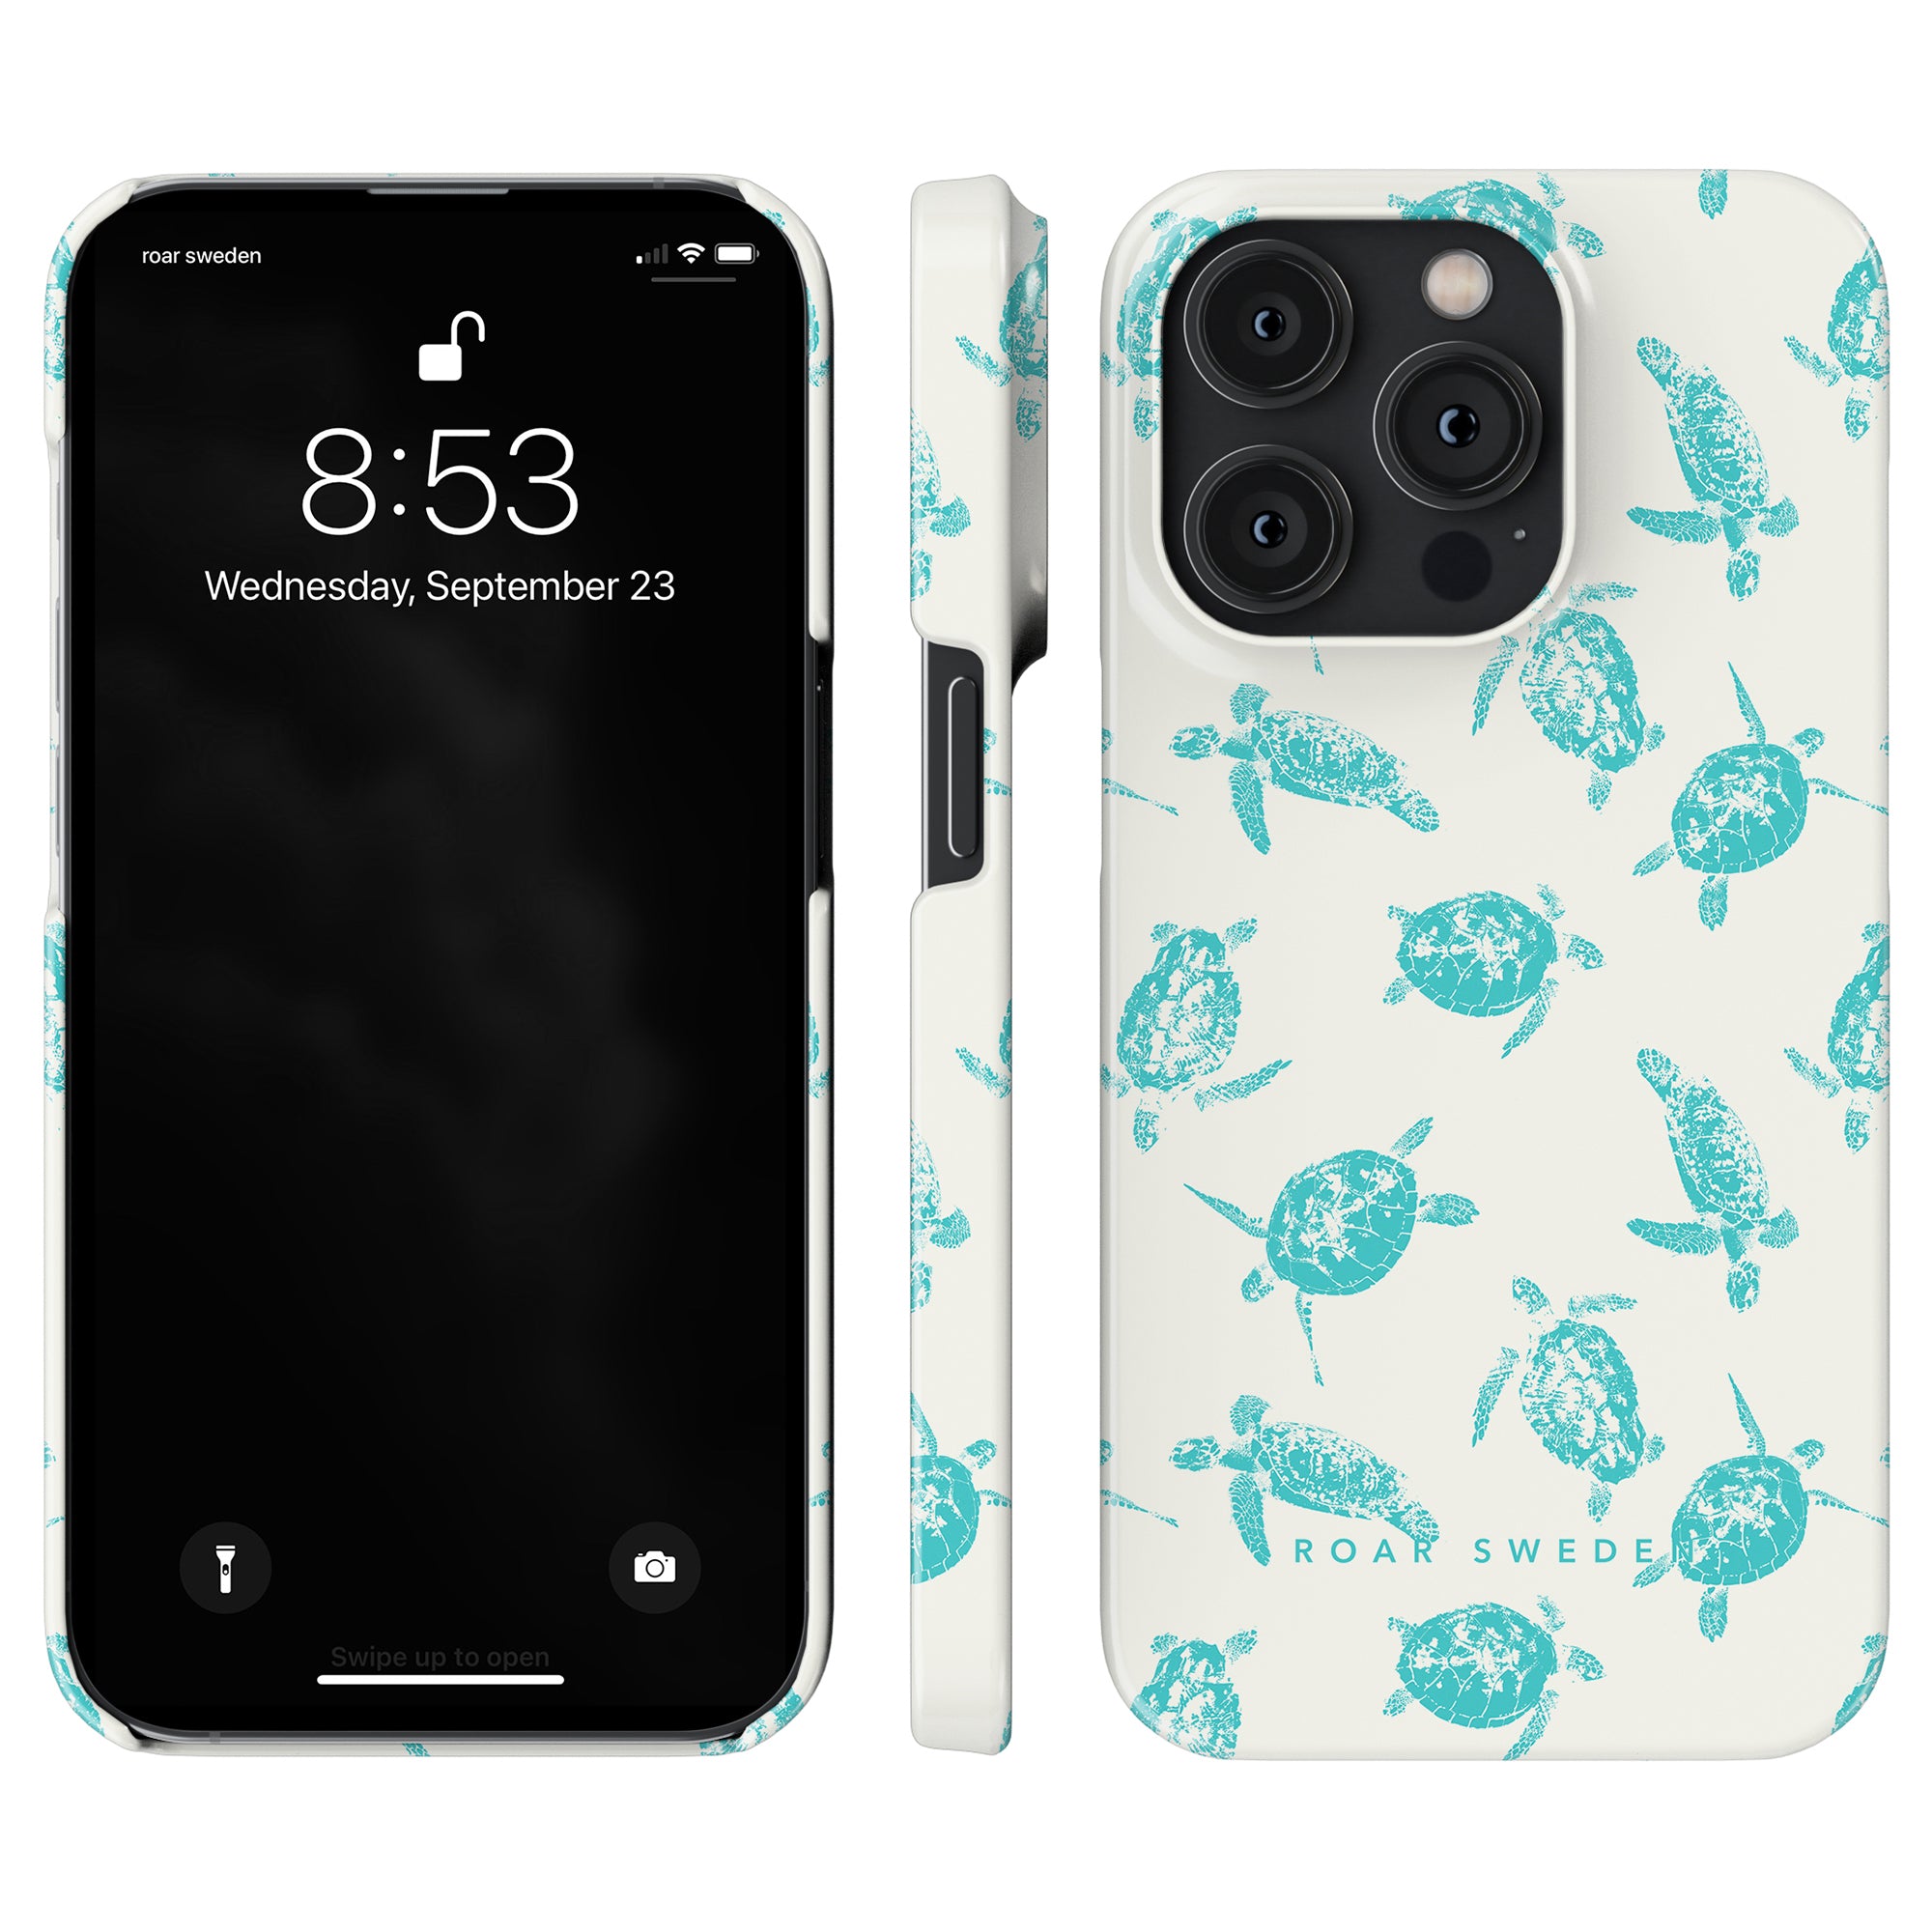 White smartphone with a Sea Turtles - Slim case displaying the lock screen with the time and date, alongside an organic skincare app.